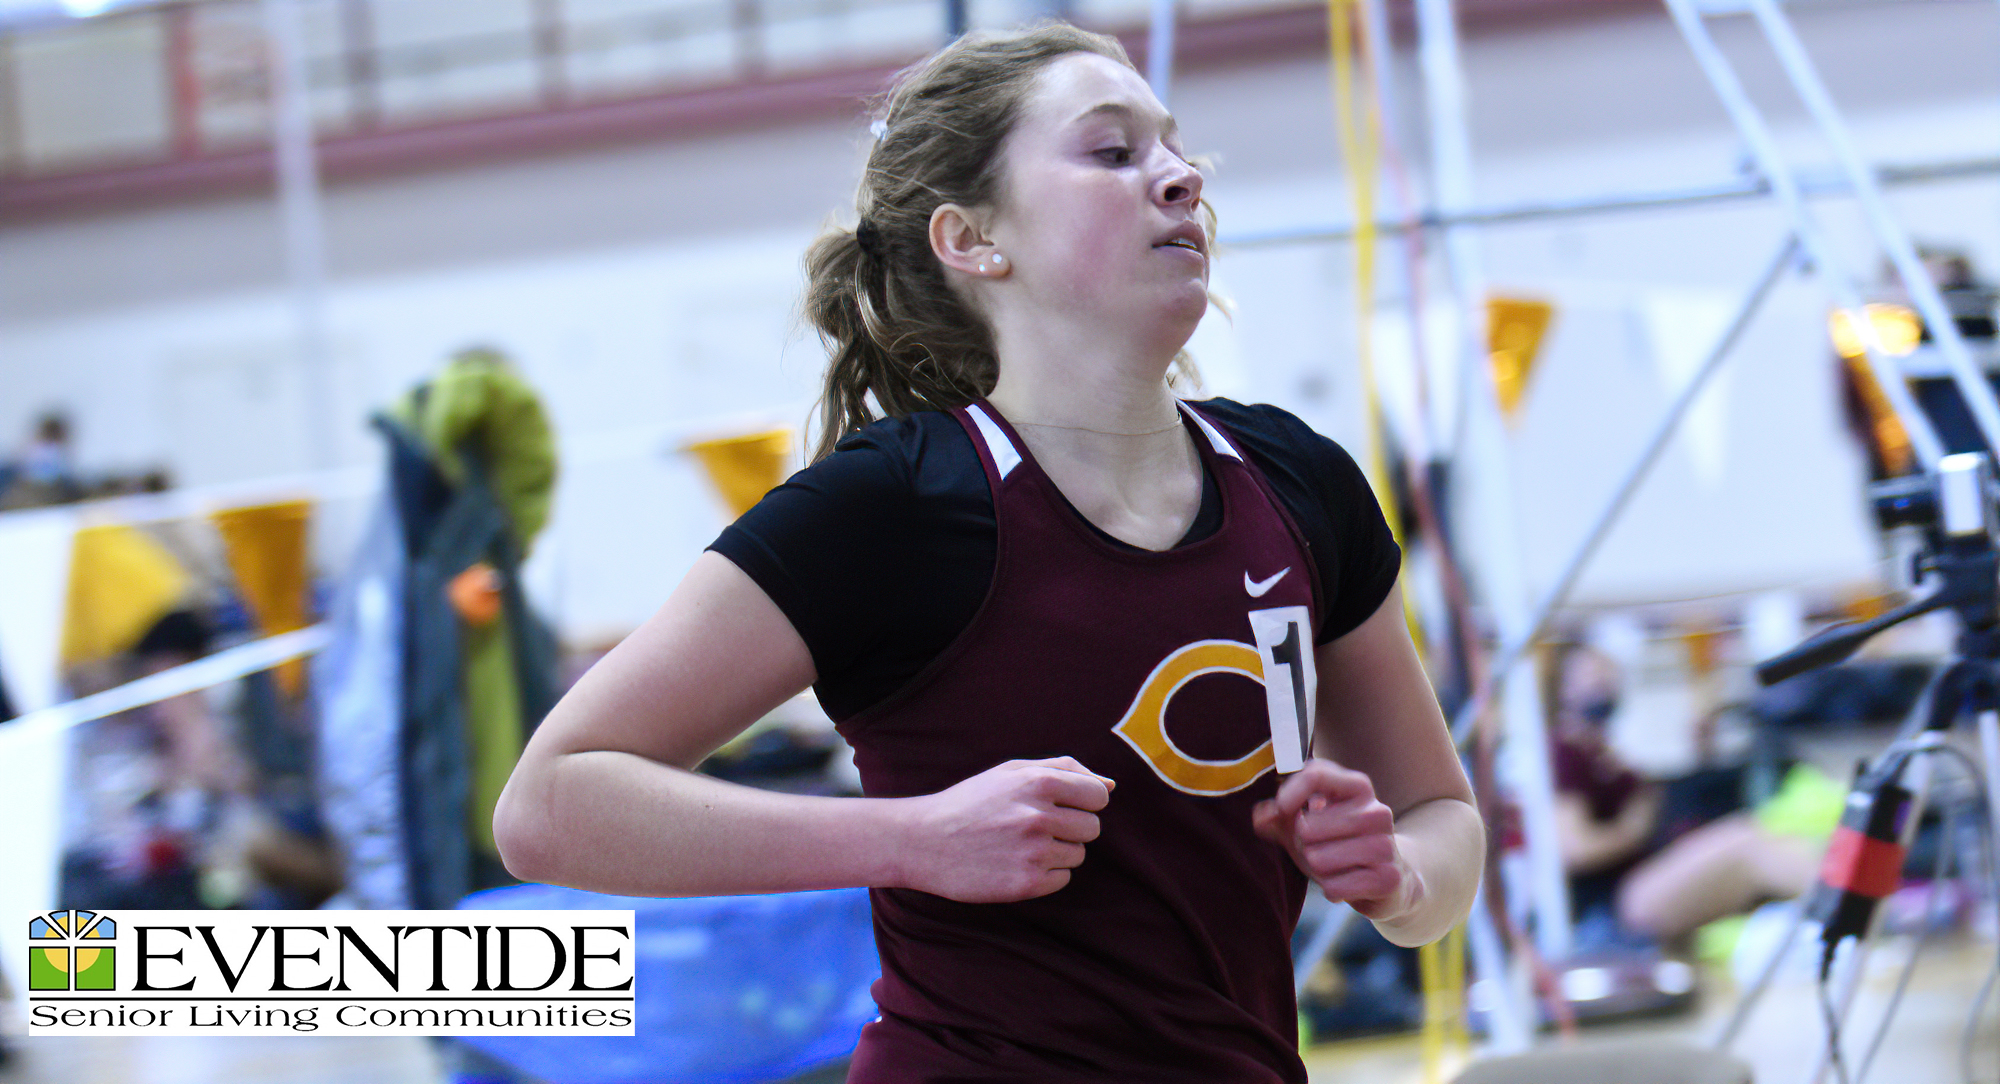 Senior Josie Herrmann broke the school record in the 600 meters at the CSB/SJU Invite. She ran a 1:37.20 which broke the 14-yar-old record held by Heather Schuster.